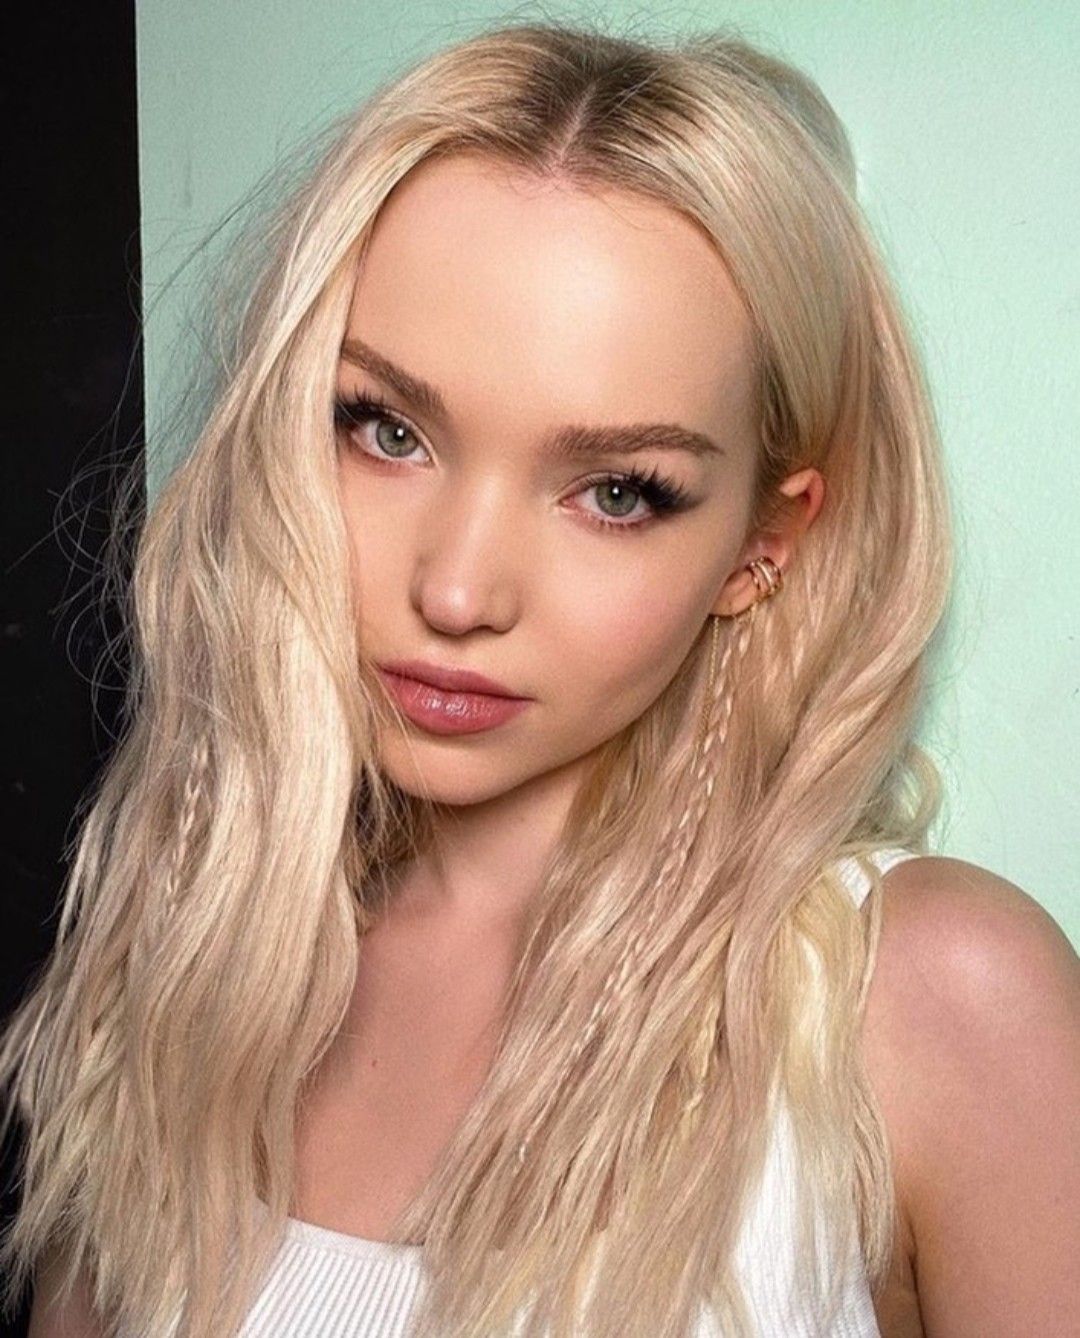 Behind The Scenes With Dove Cameron: Get To Know The Actress Behind The Name